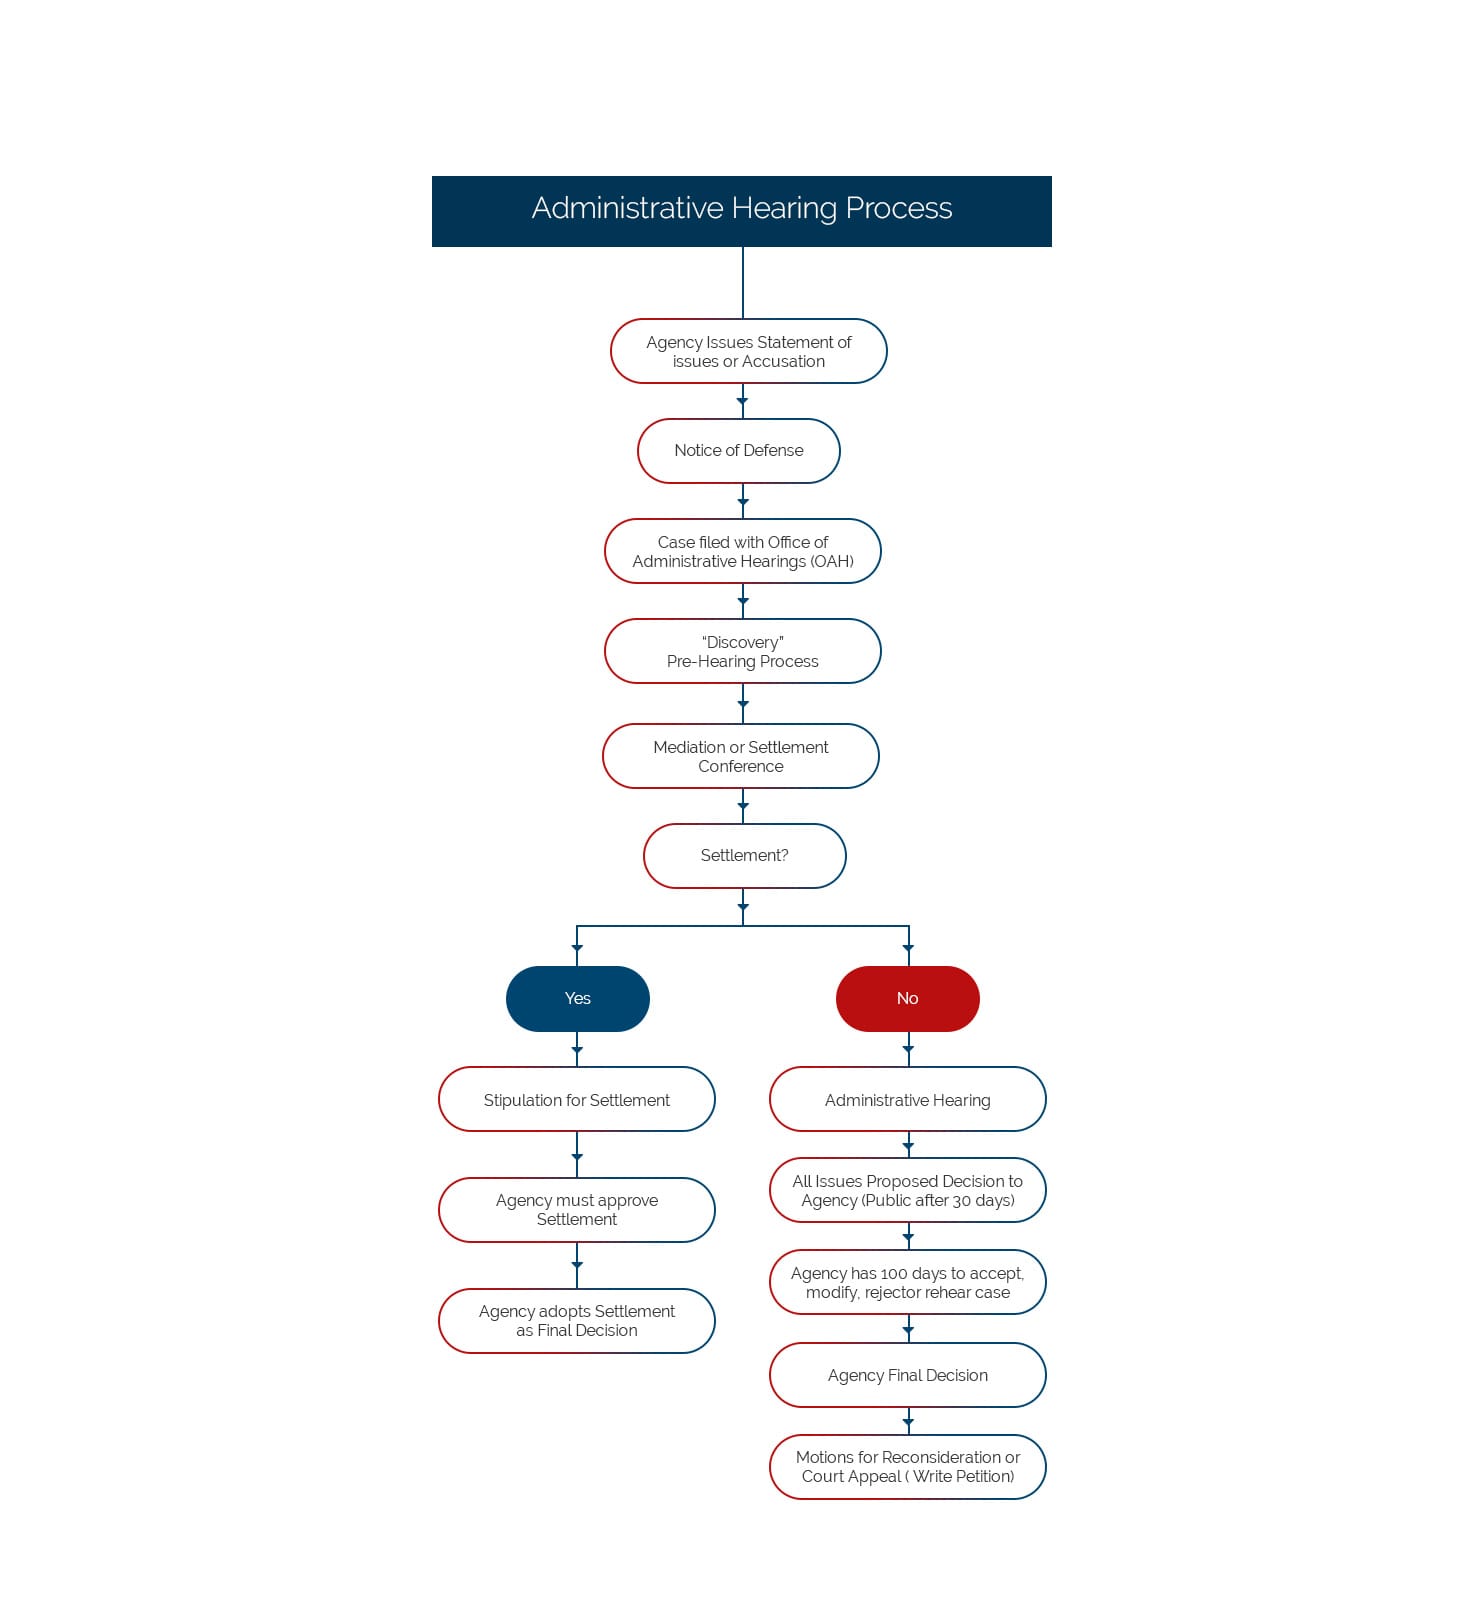 Flow chart of the Administrative Hearing Process